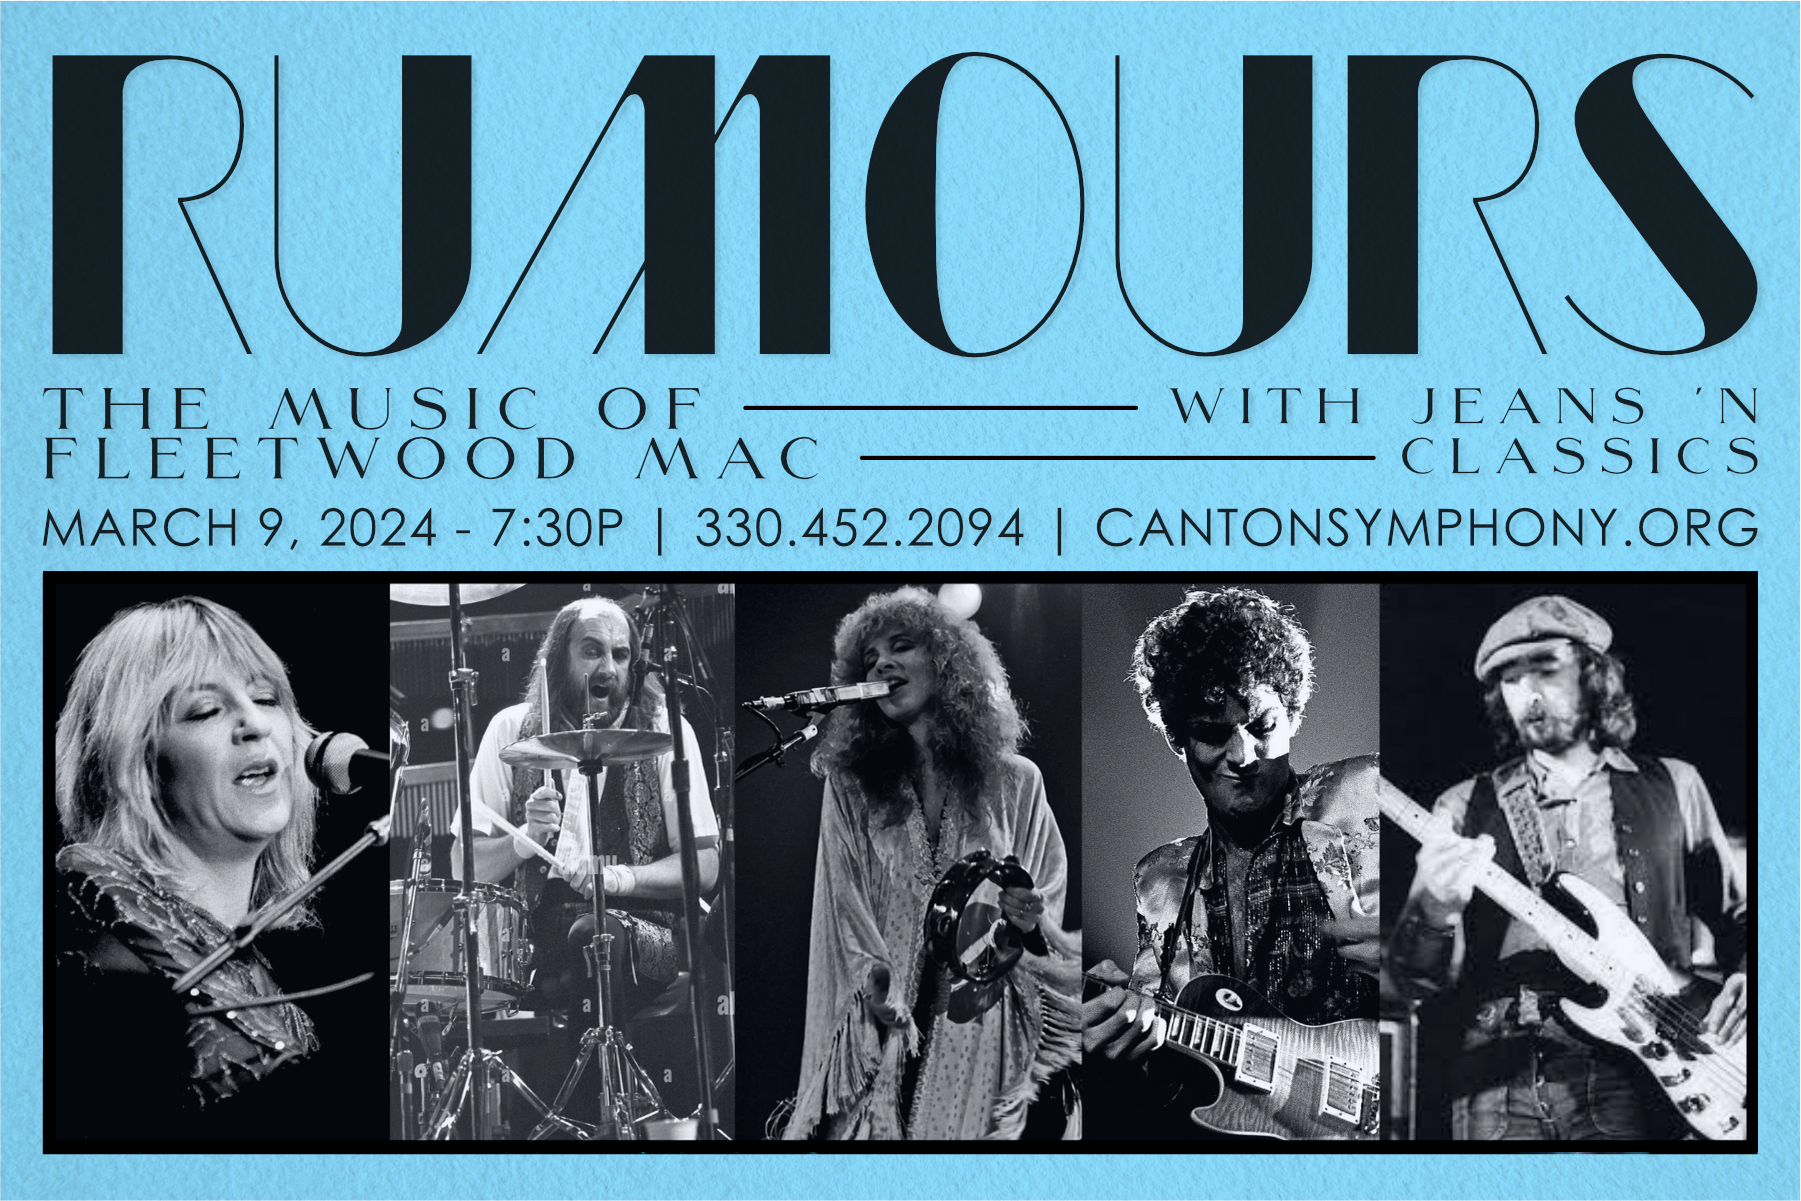 A graphic created to promote RUMOURS: The Music of Fleetwood Mac that features black and white images of Fleetwood Mac's members in their prime. Of particular note is Christine McVie, who recently passed away.